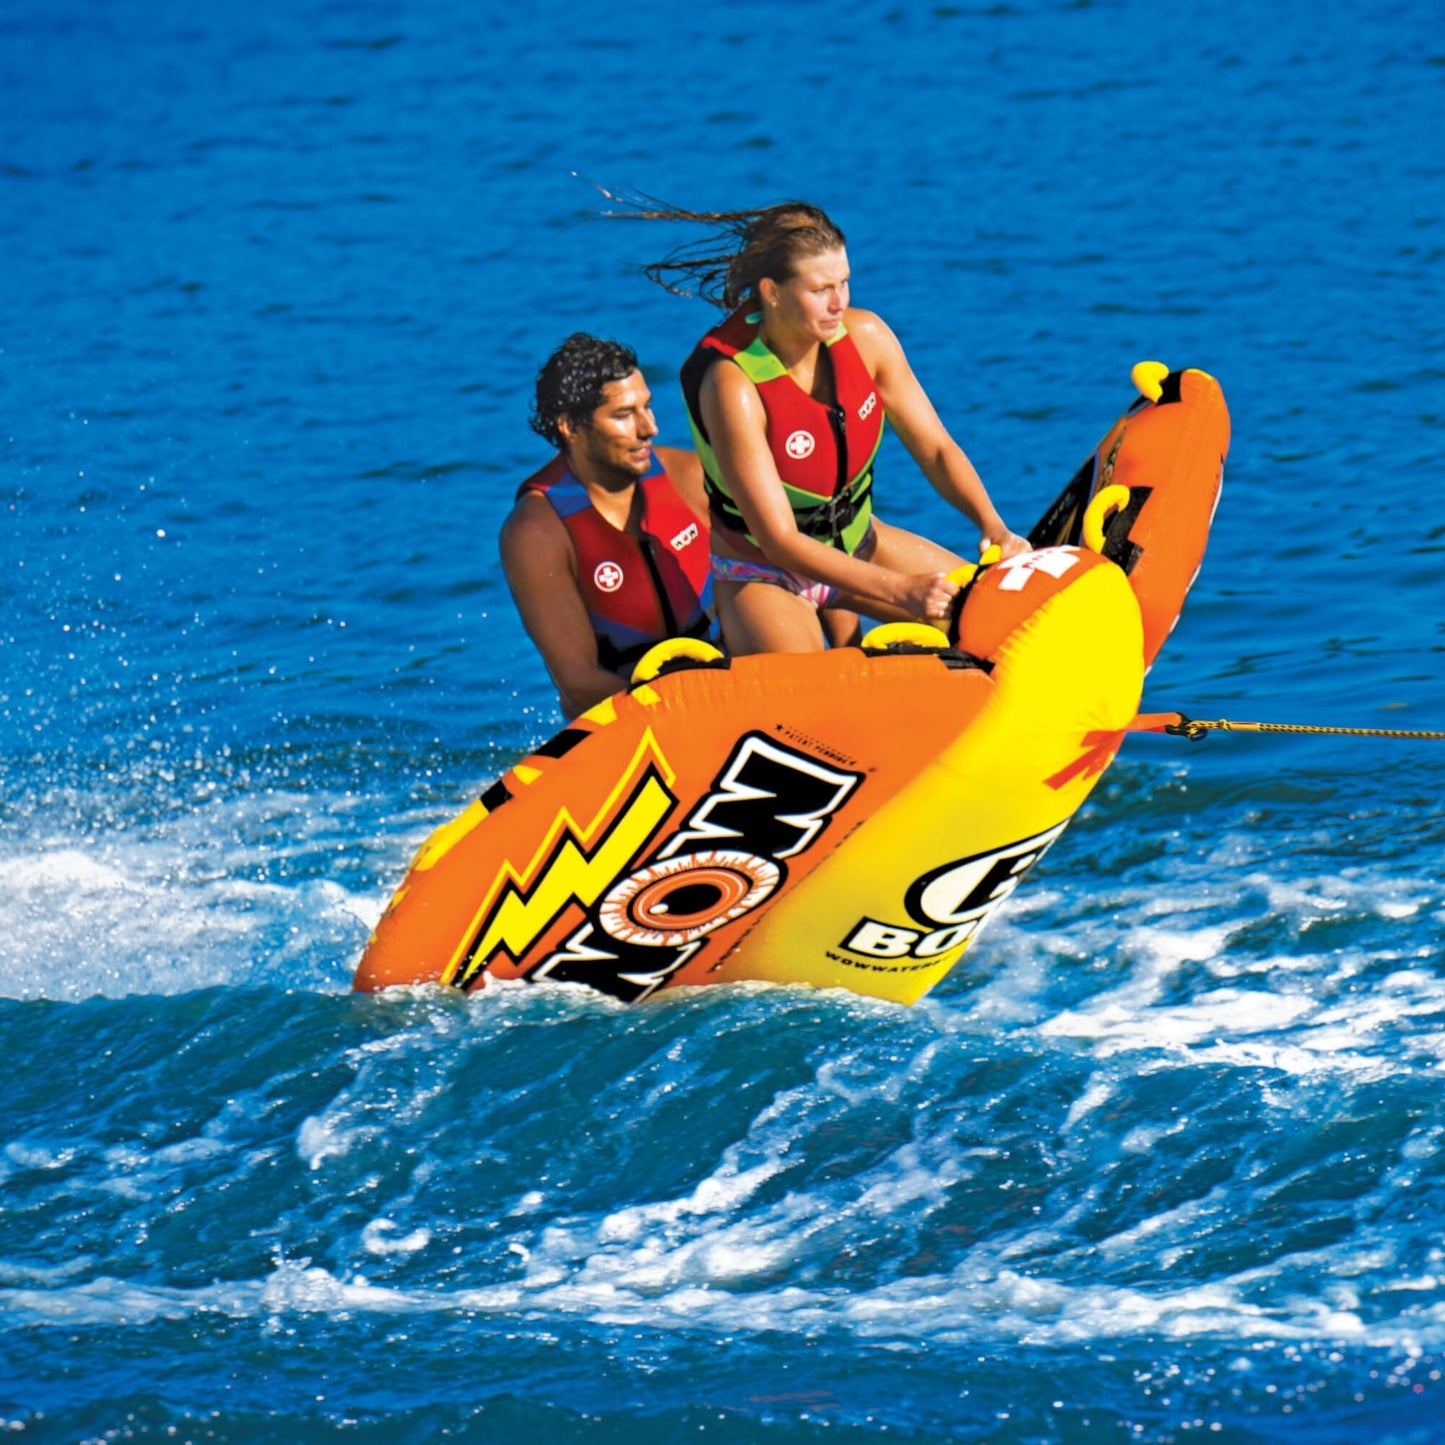 Bolt 1 - 4 Person Inflatable Deck Towable Tube